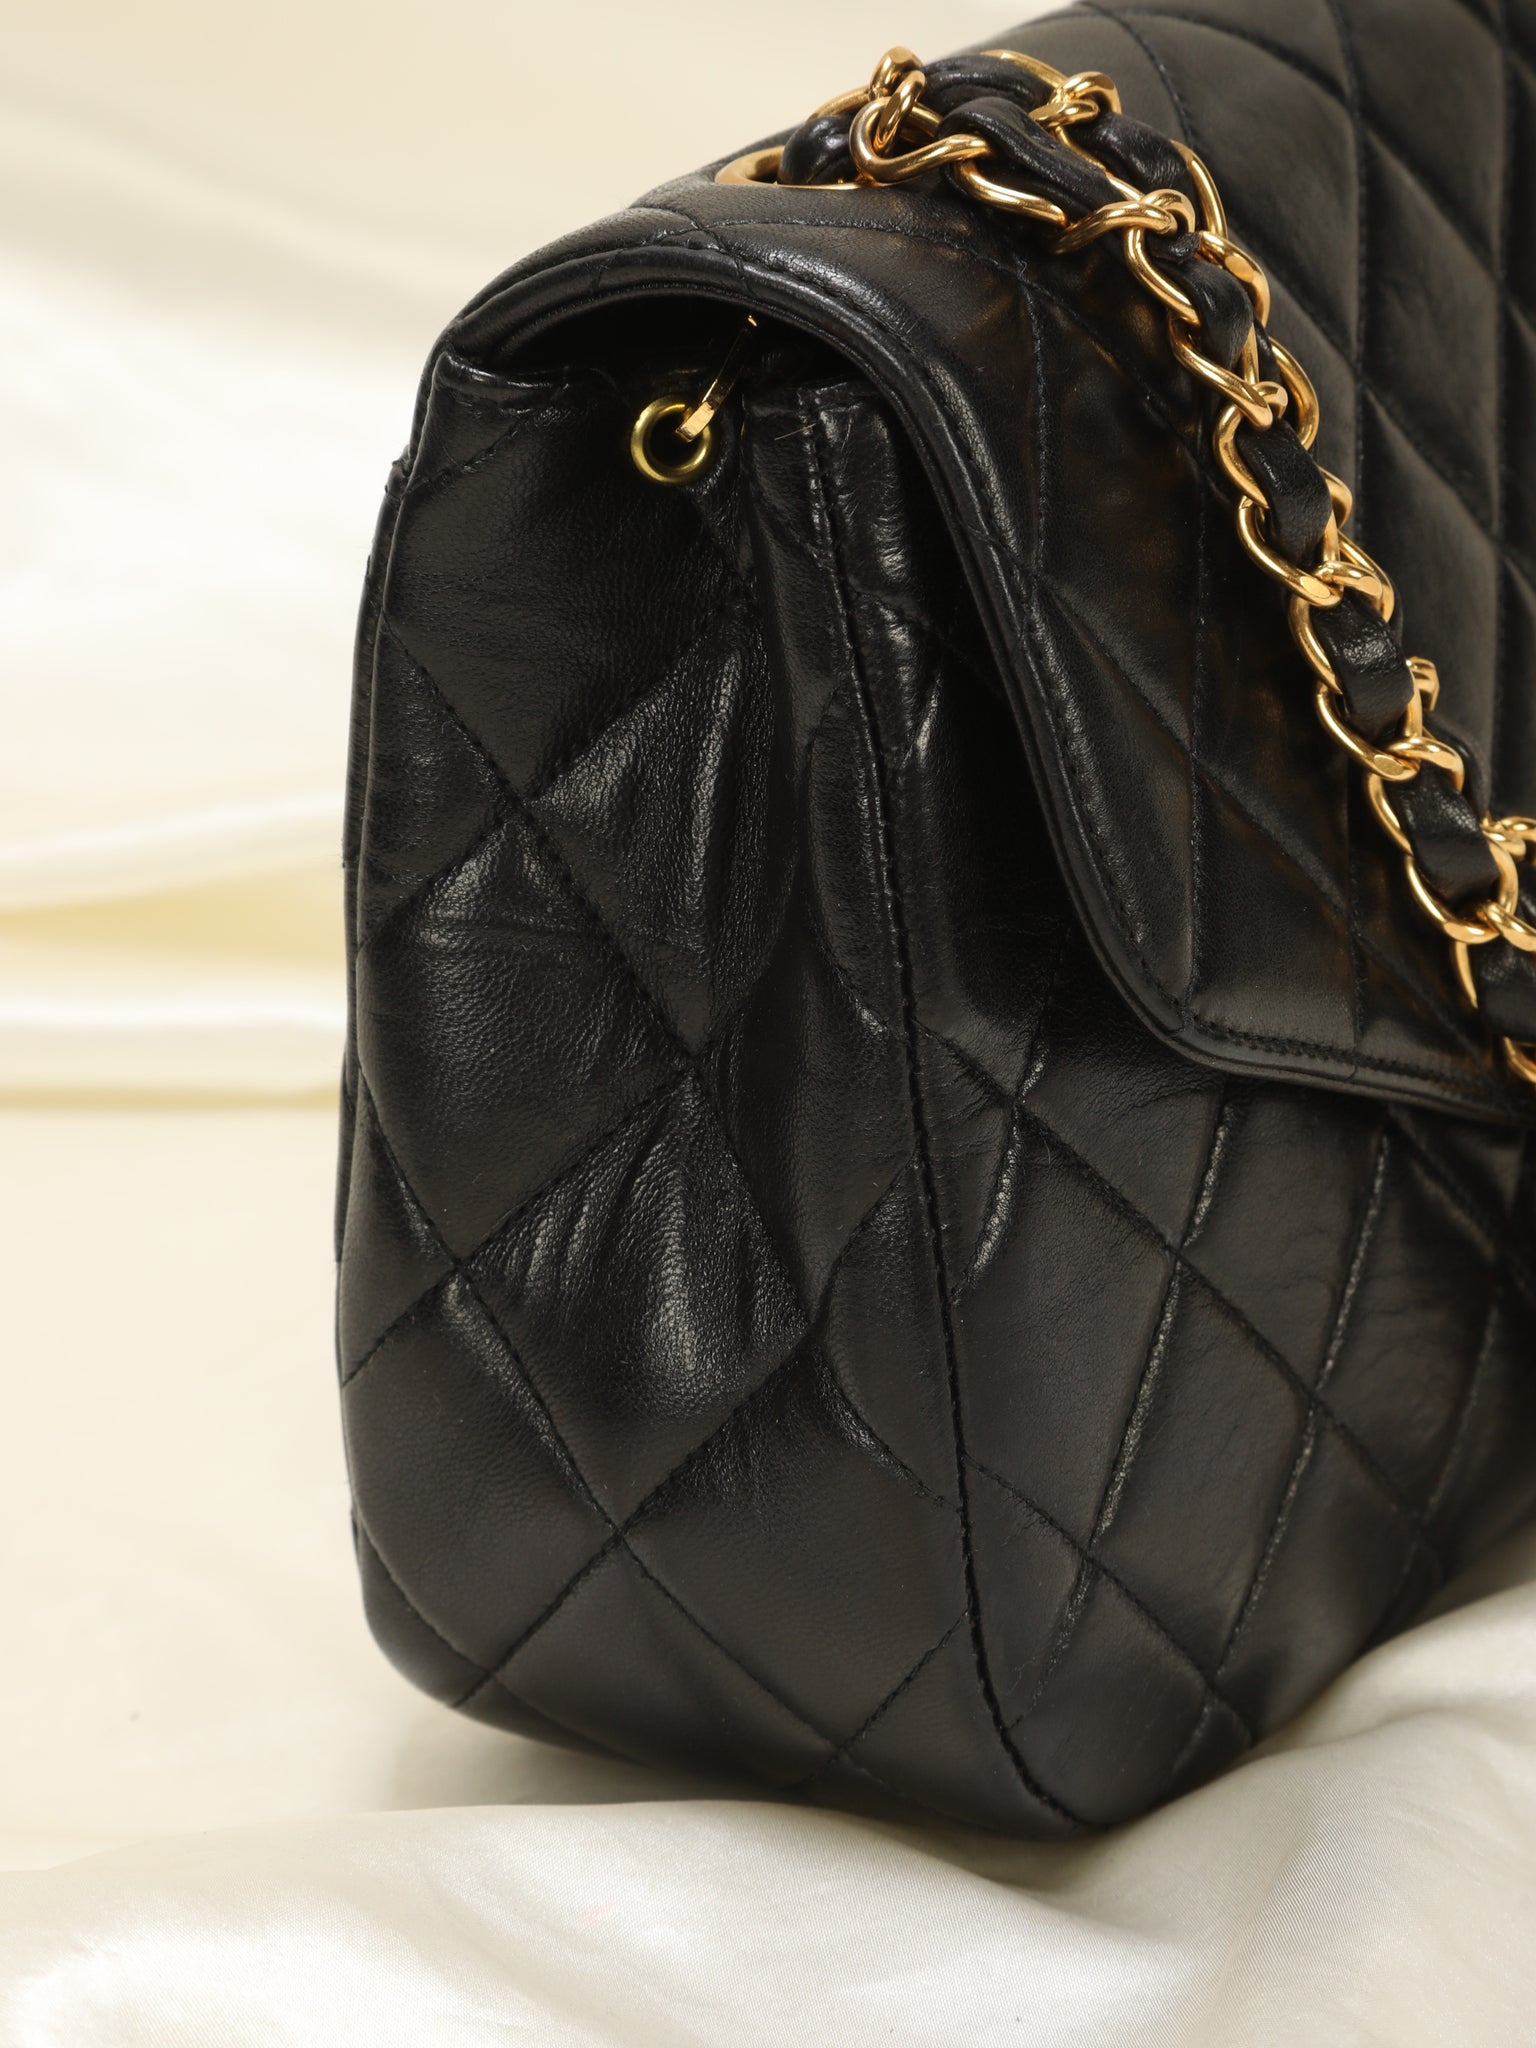 Extremely Rare Chanel Lambskin Knotted Half Flap